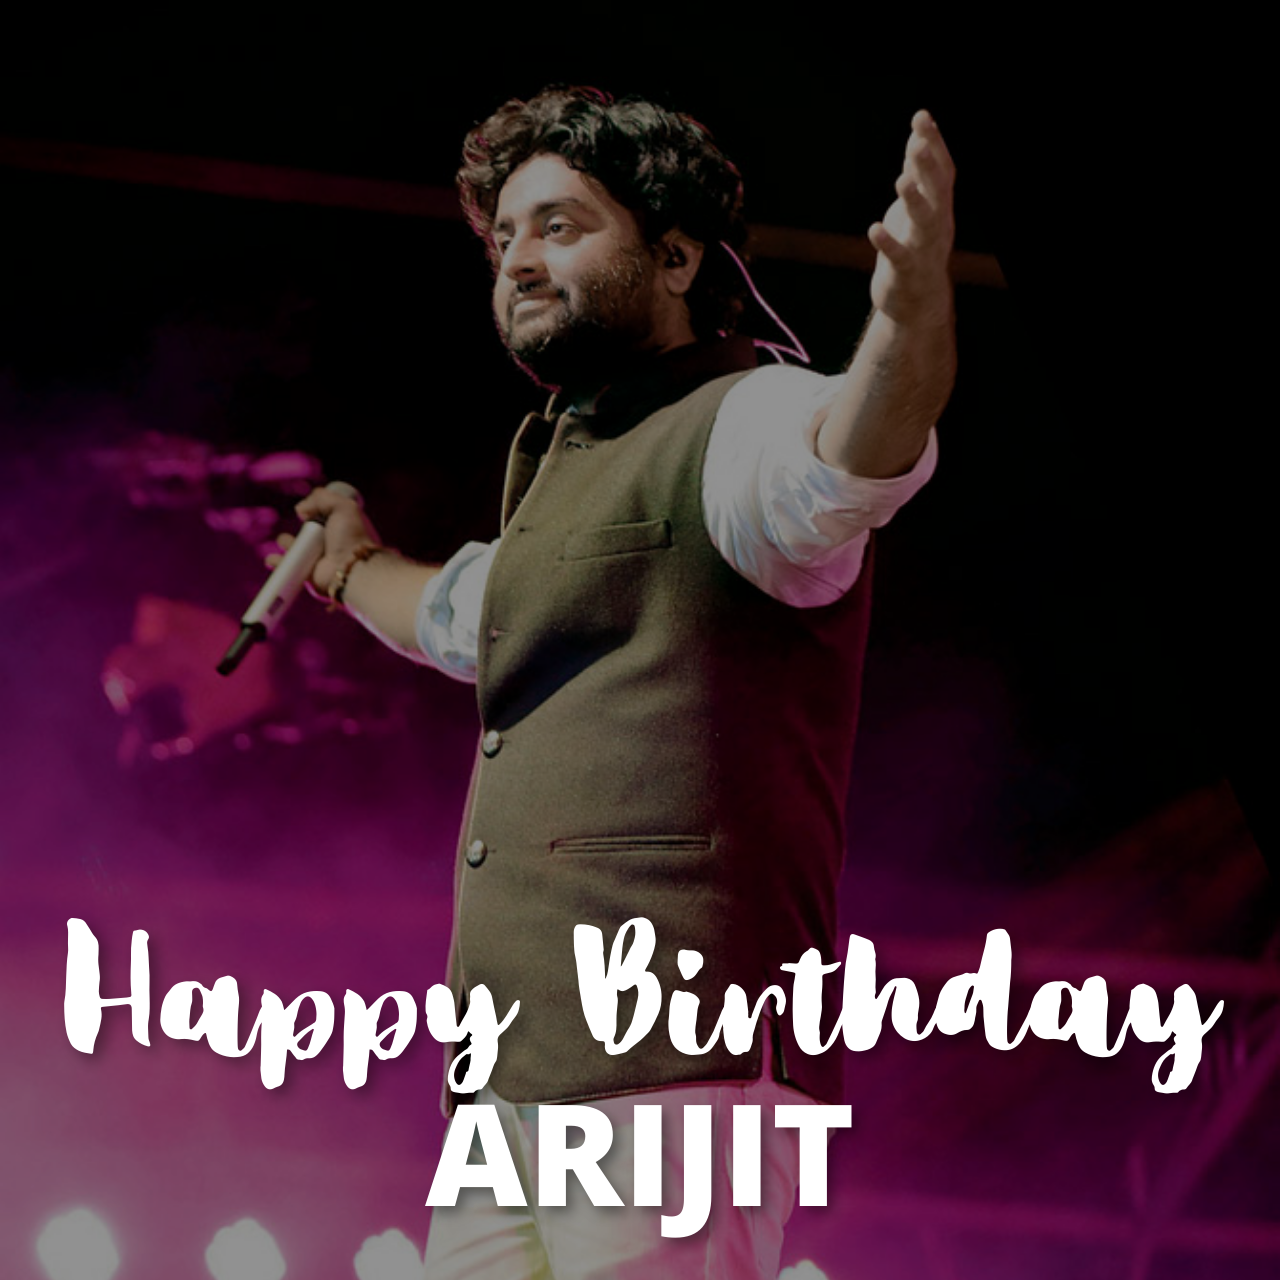 Happy Birthday Arijit Singh Wishes, Quotes Greetings, and HD Images to Share